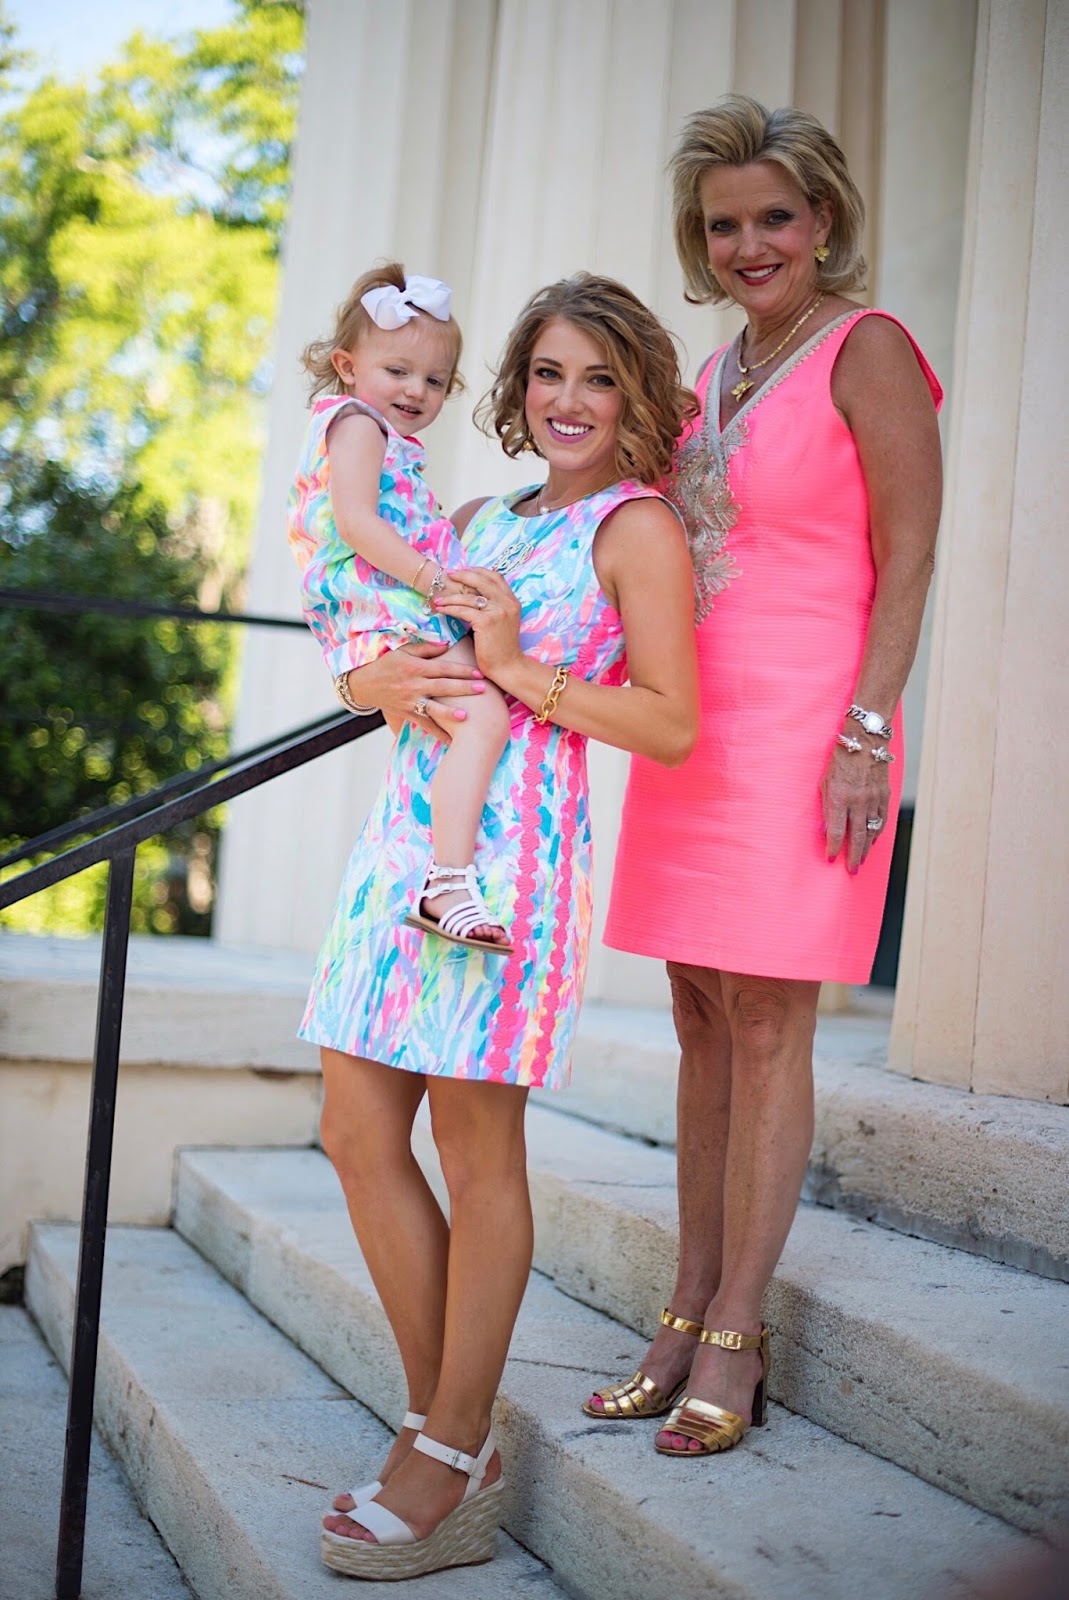 Matching in Lilly Pulitzer - Click through to see more on Something Delightful Blog!